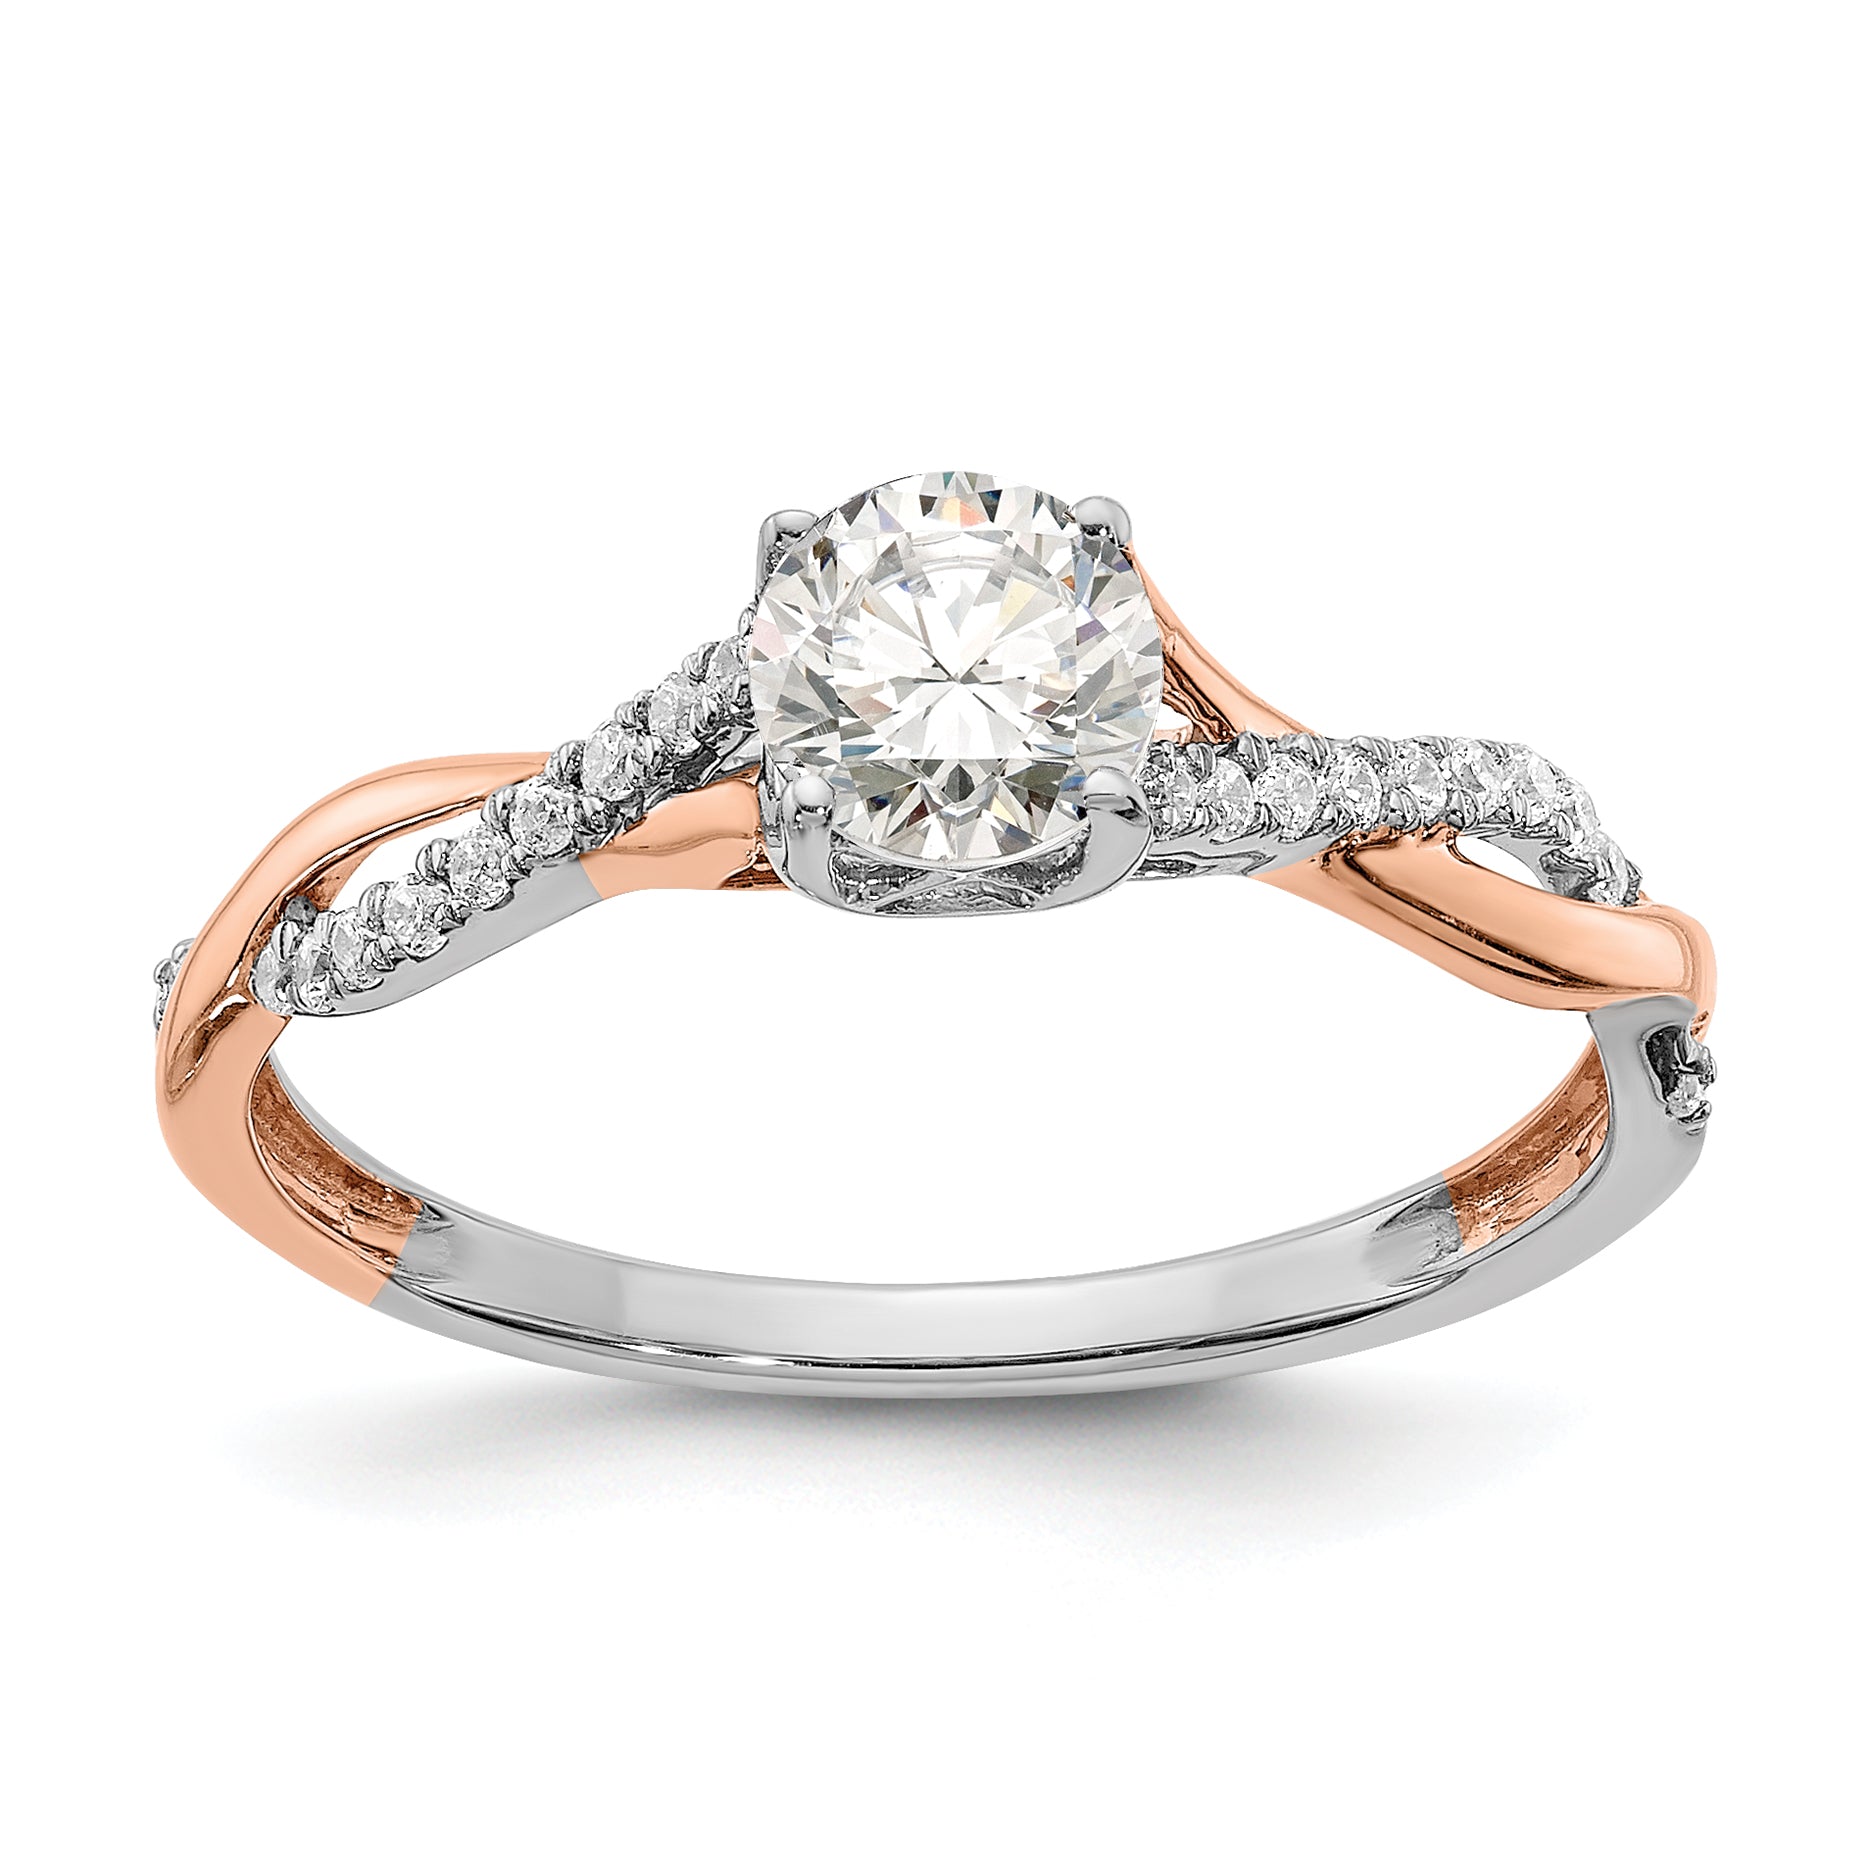 Image of ID 1 050ct CZ Solid Real 14k White & Rose Gold Twist Design Engagement Ring